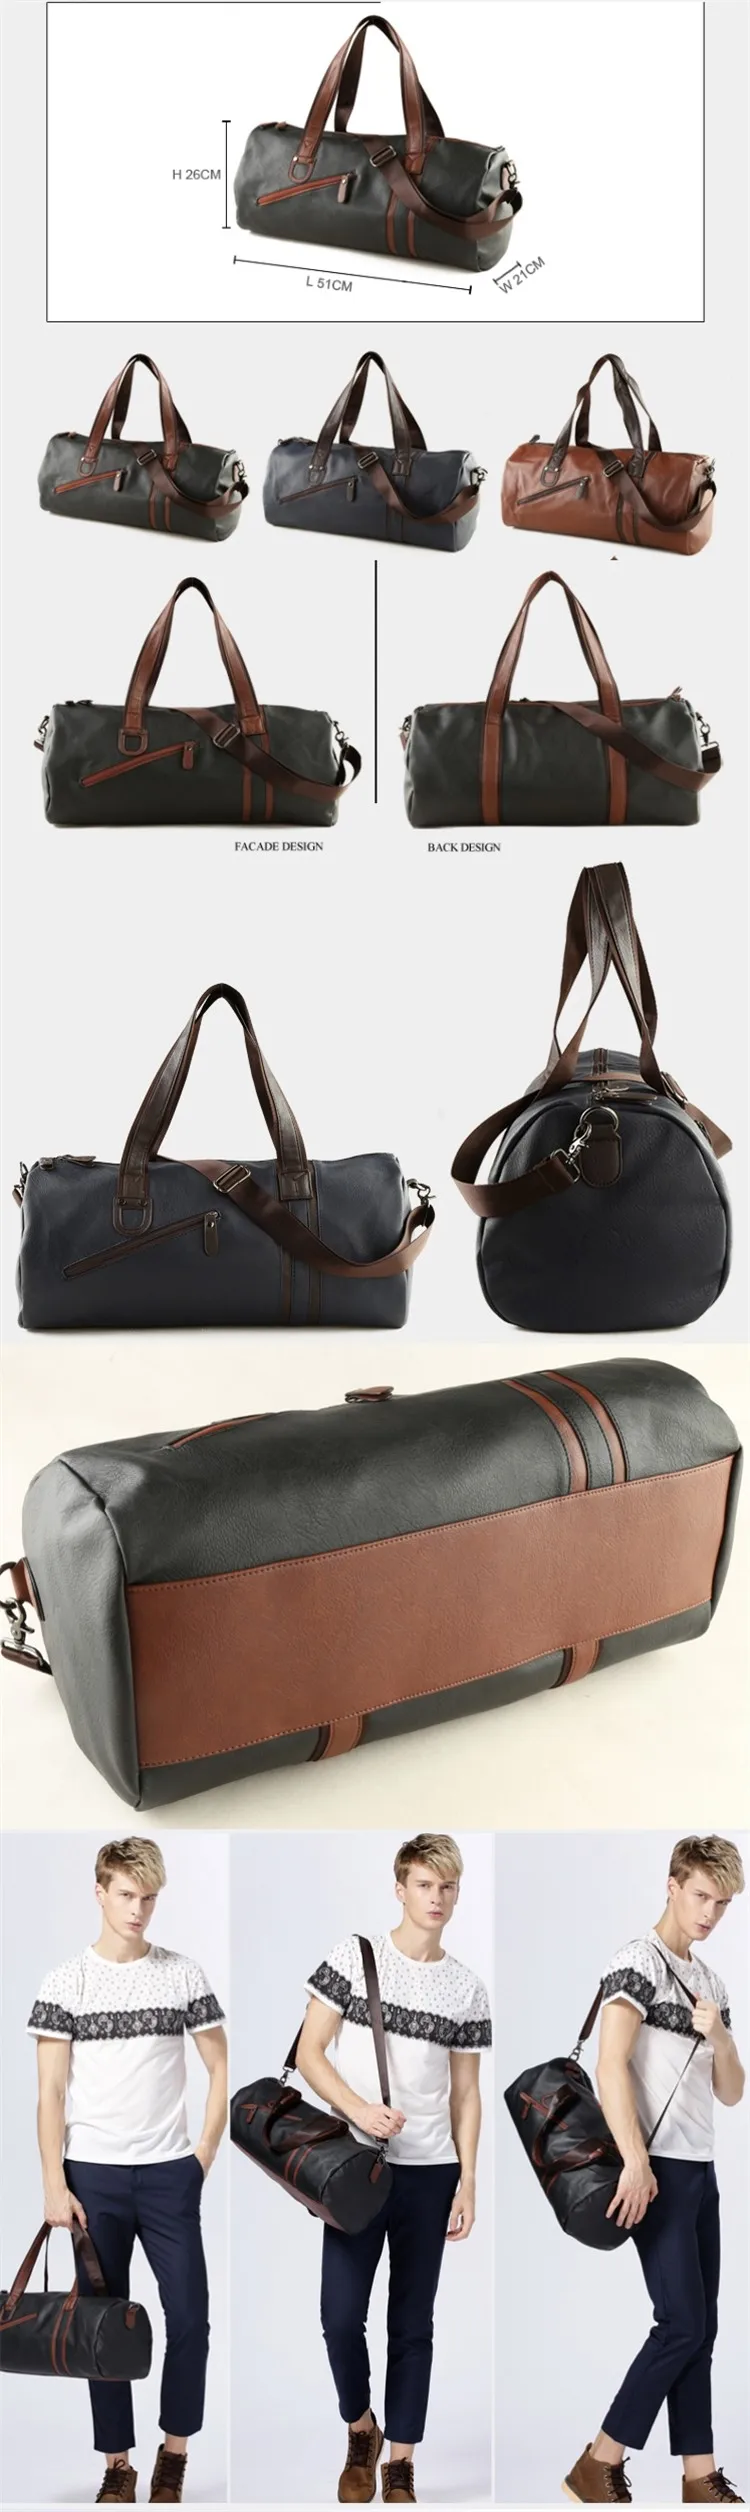 custom small mens leather duffle bag for gym and sports